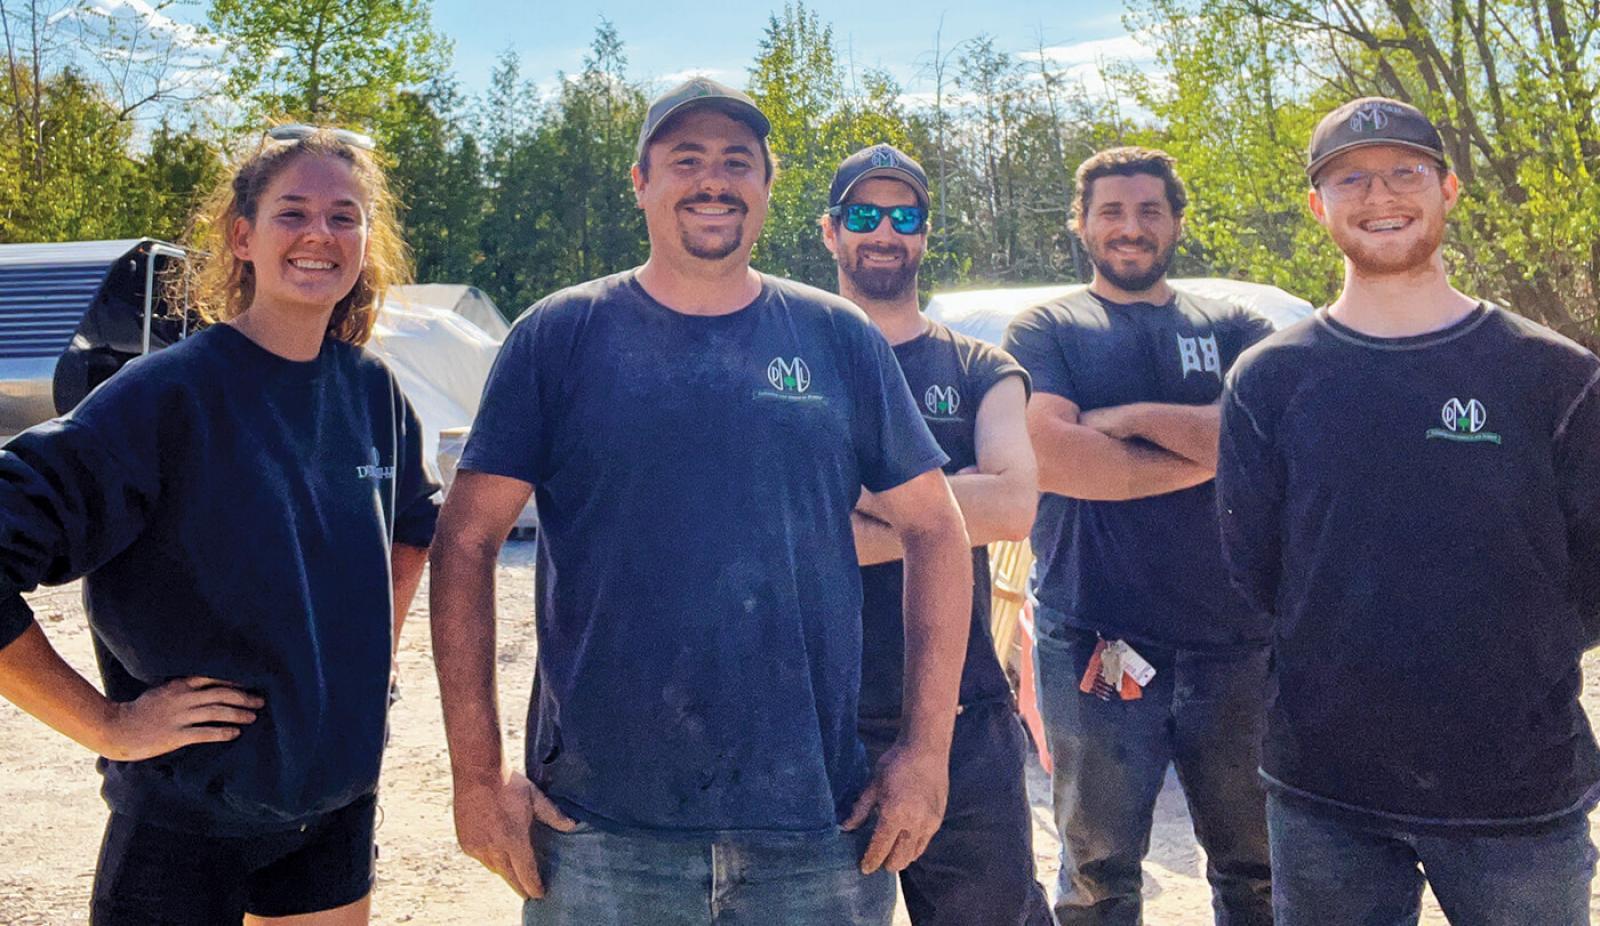 Keegan Stribbell (second from left) with fellow crew members at Dusty Miller Landscaping.